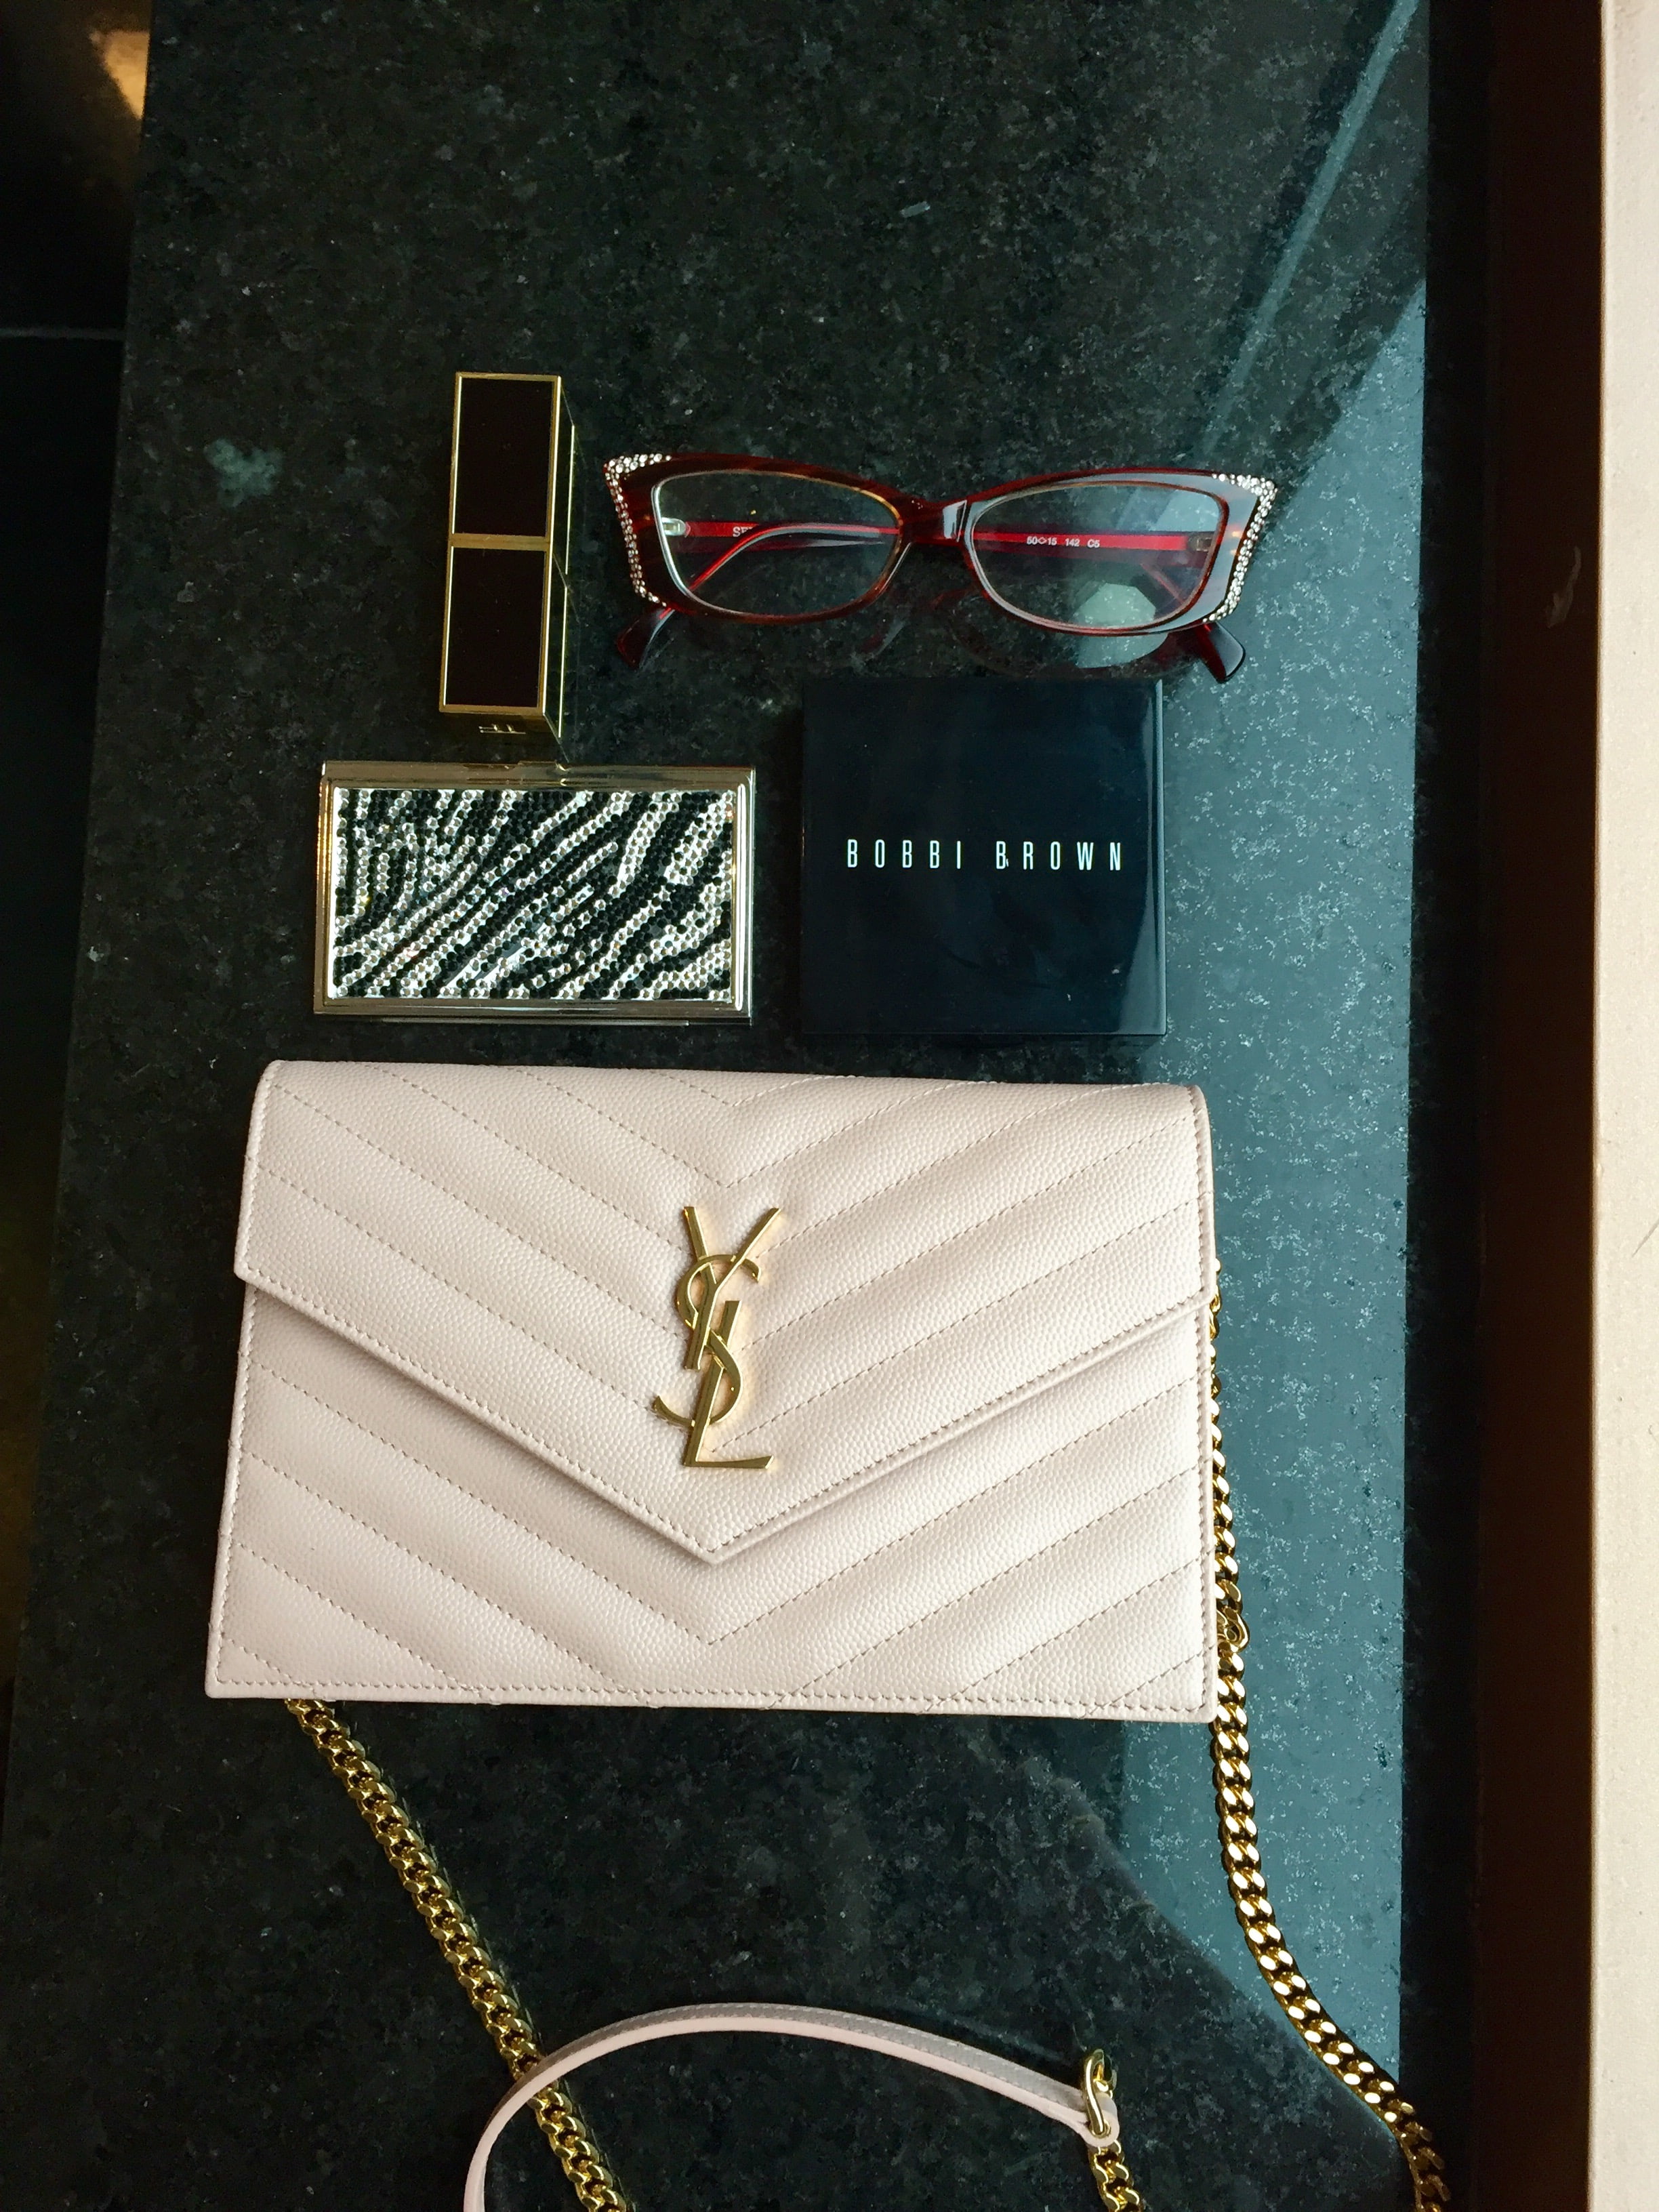 Saint Laurent vs Chanel Card Holder Wallets—Which is For You? 